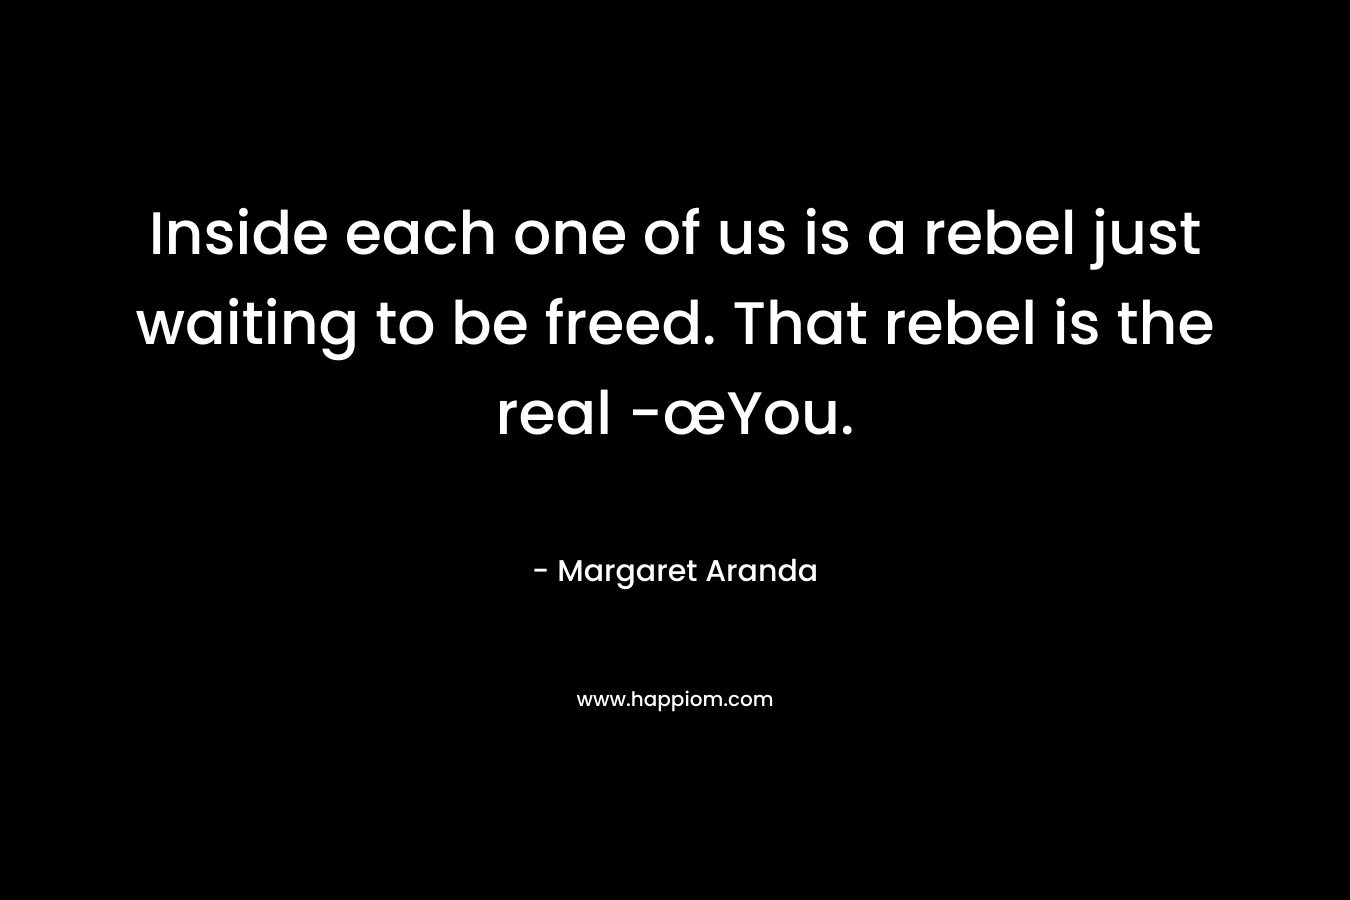 Inside each one of us is a rebel just waiting to be freed. That rebel is the real -œYou.